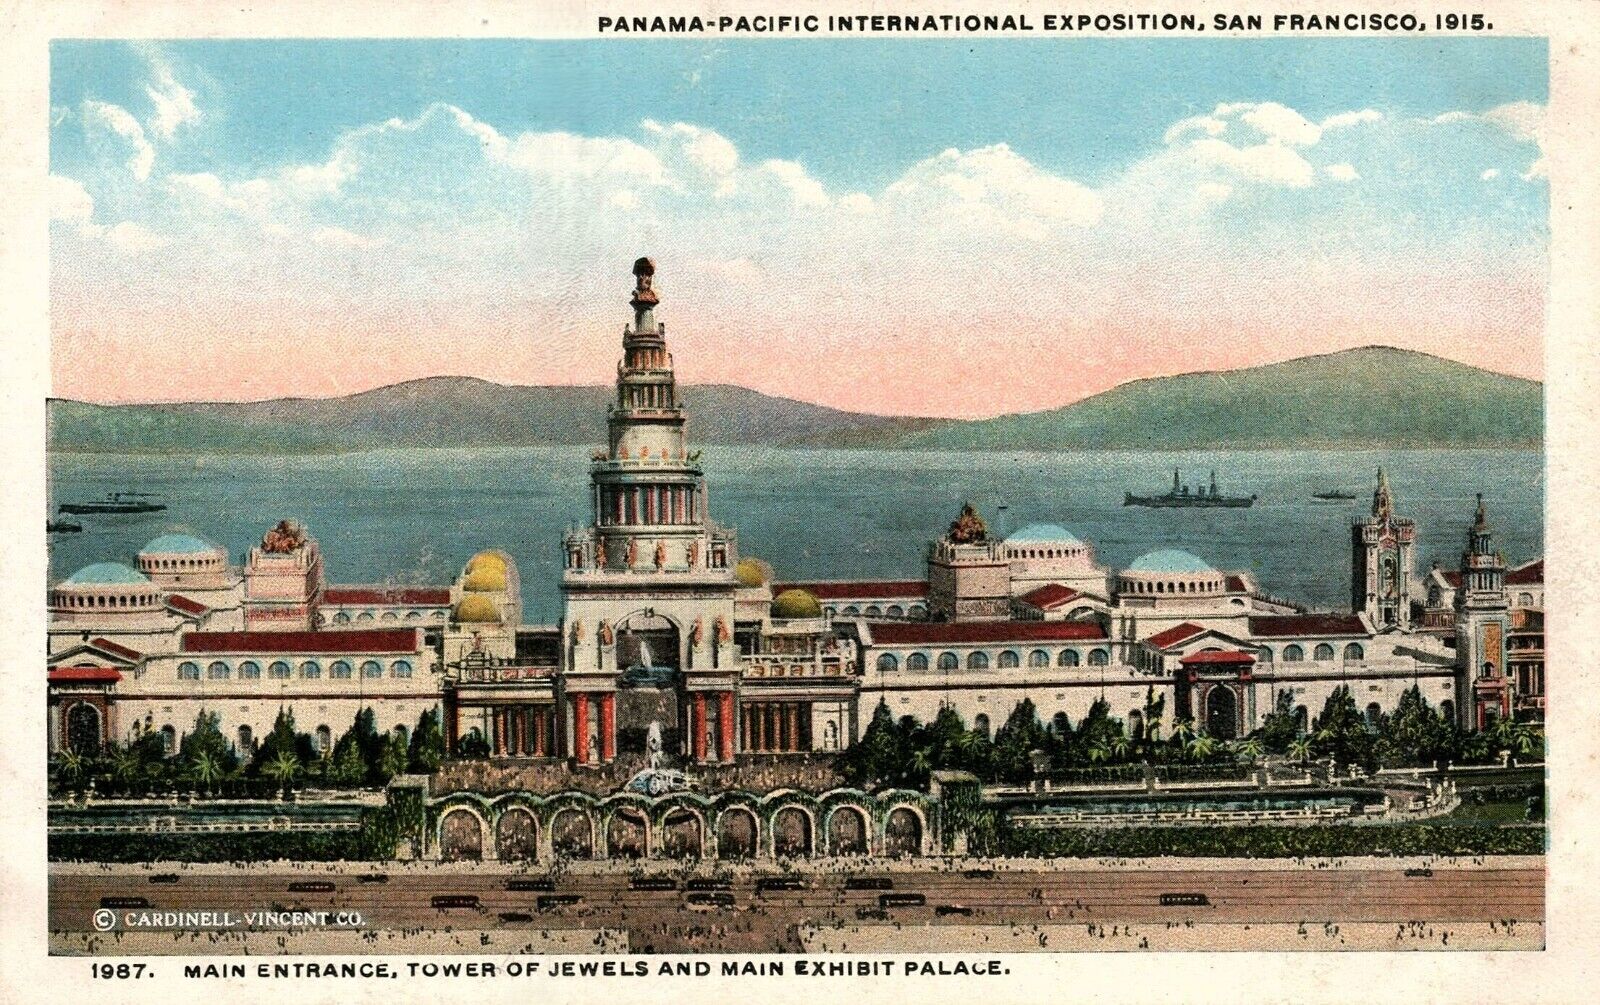 SAN FRANCISCO POSTCARD - 1915 PPIE MAIN ENTRANCE, TOWER OF JEWELS